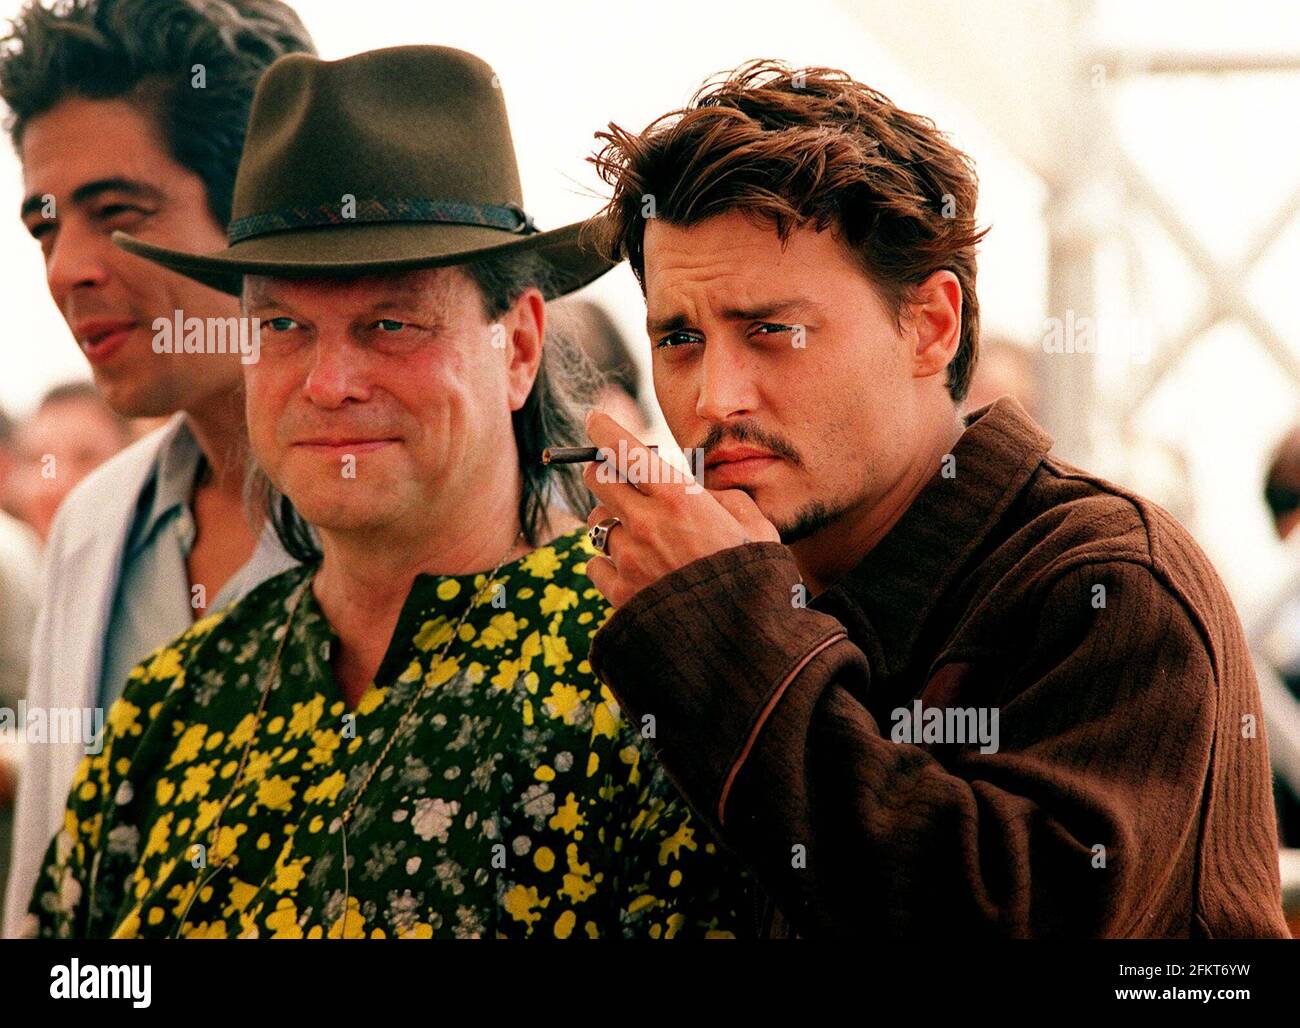 Terry Gilliam director of film Fear and Loathing in Las Vegas with actor Johnny Depp at Cannes Film Festival  May 1998 Stock Photo